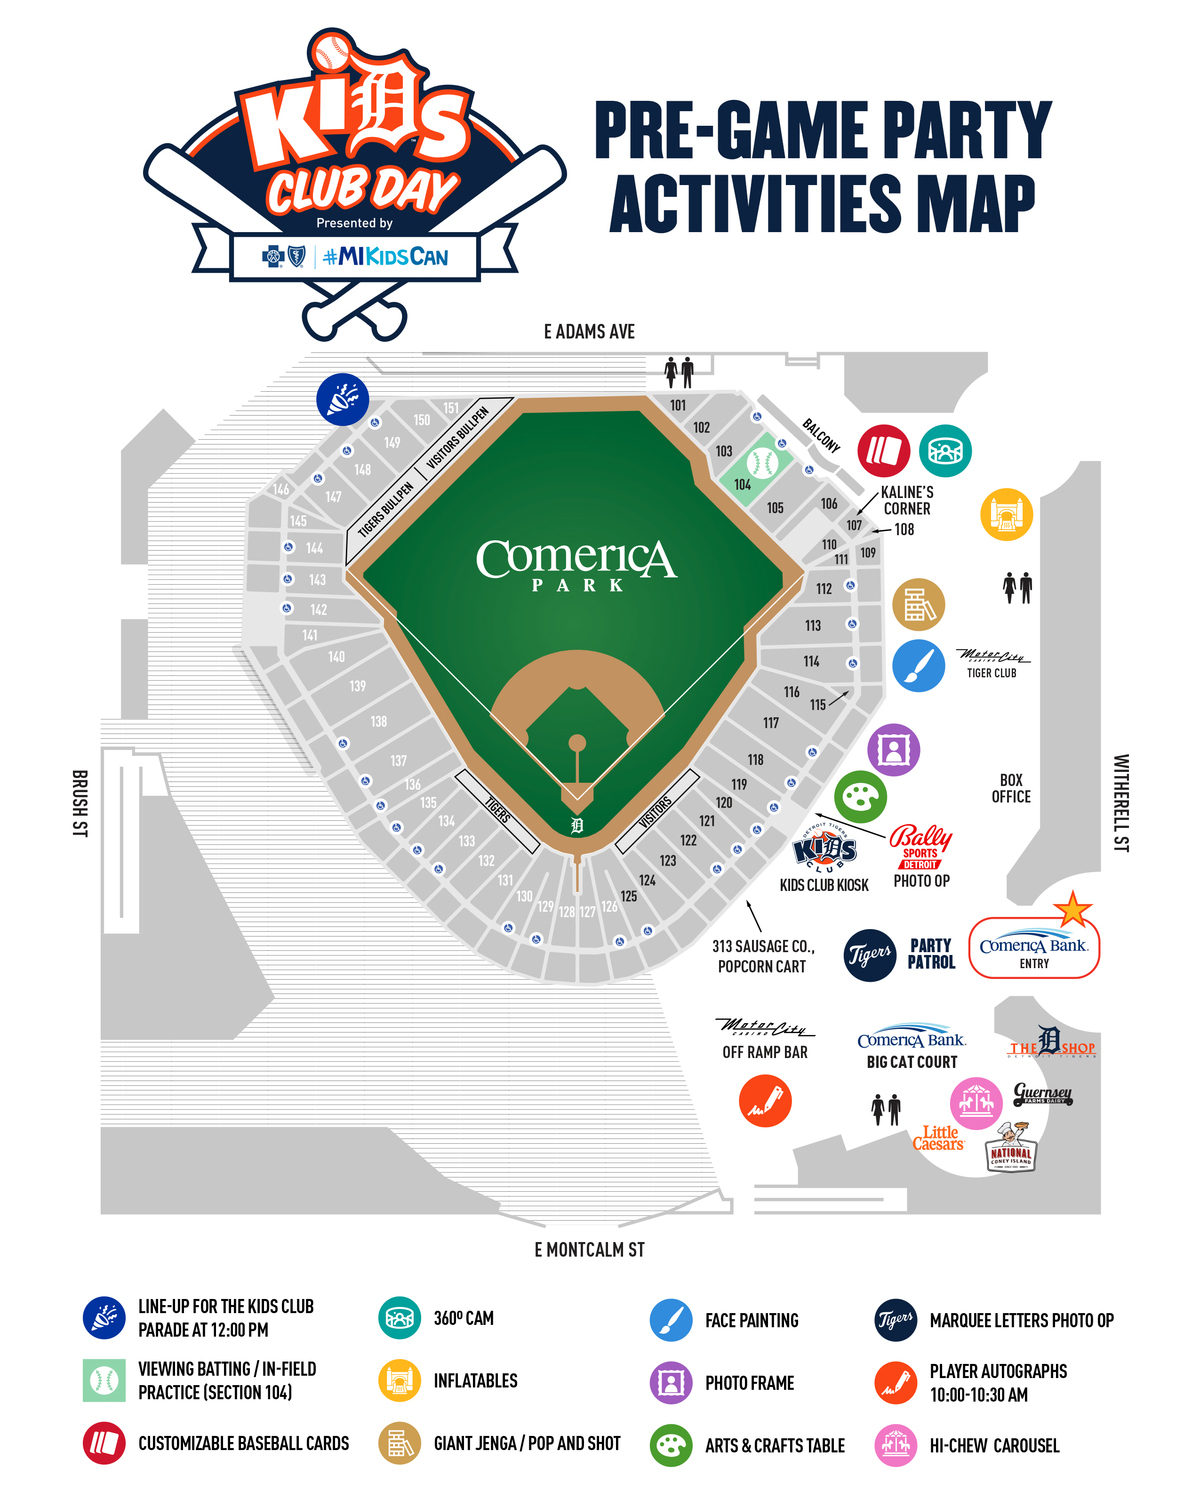 Comerica Park on X: Kids Club Day presented by @BCBSM begins NOW